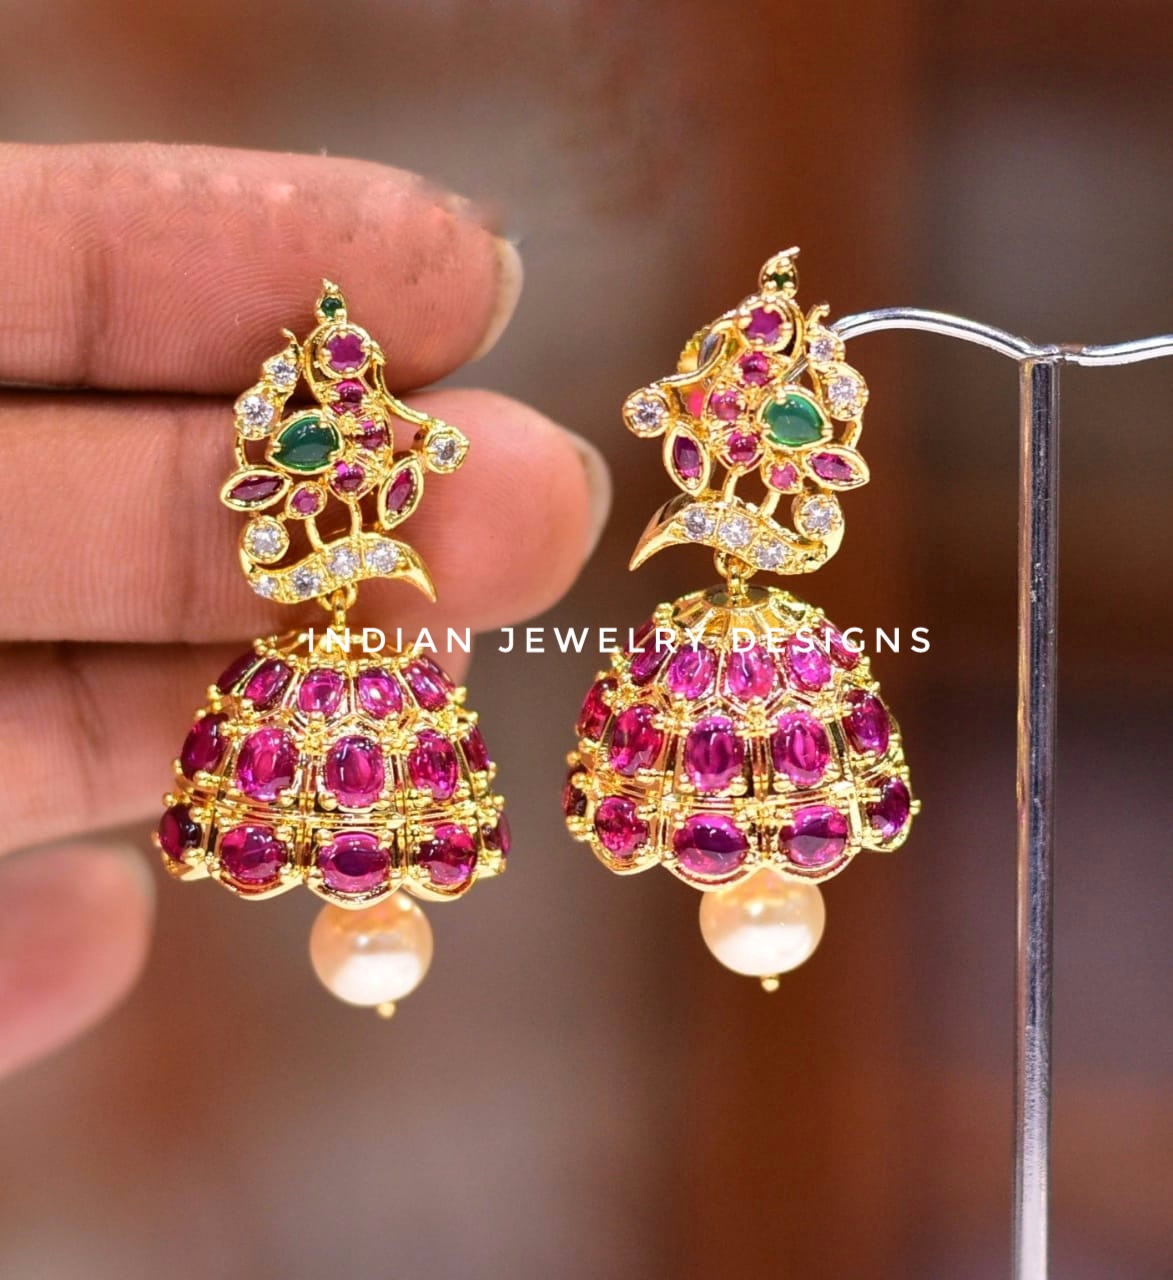 Indian Jewelry Designs Collection - Indian Jewelry Designs